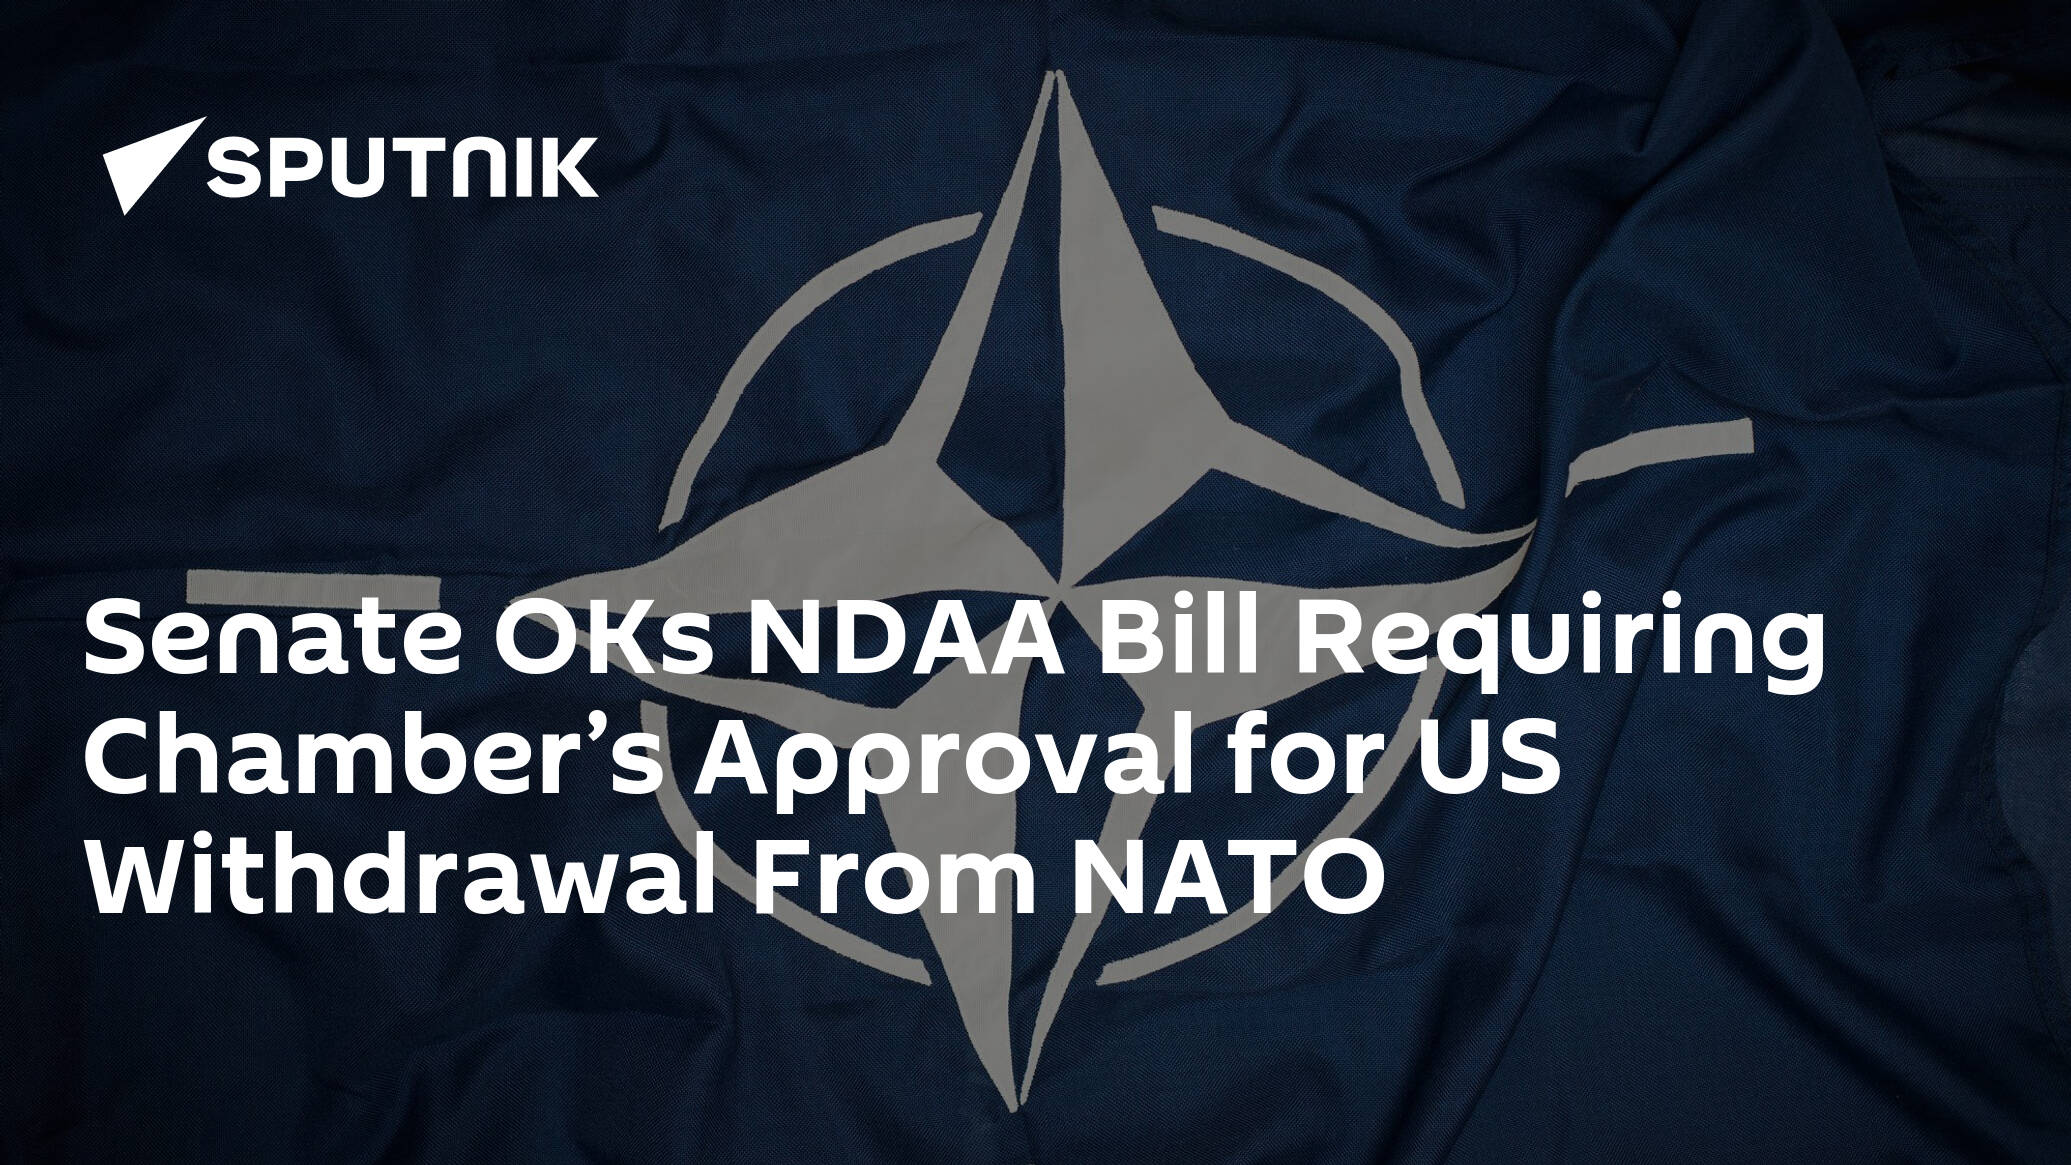 Senate OKs NDAA Bill Requiring Chamber’s Approval for US Withdrawal From NATO